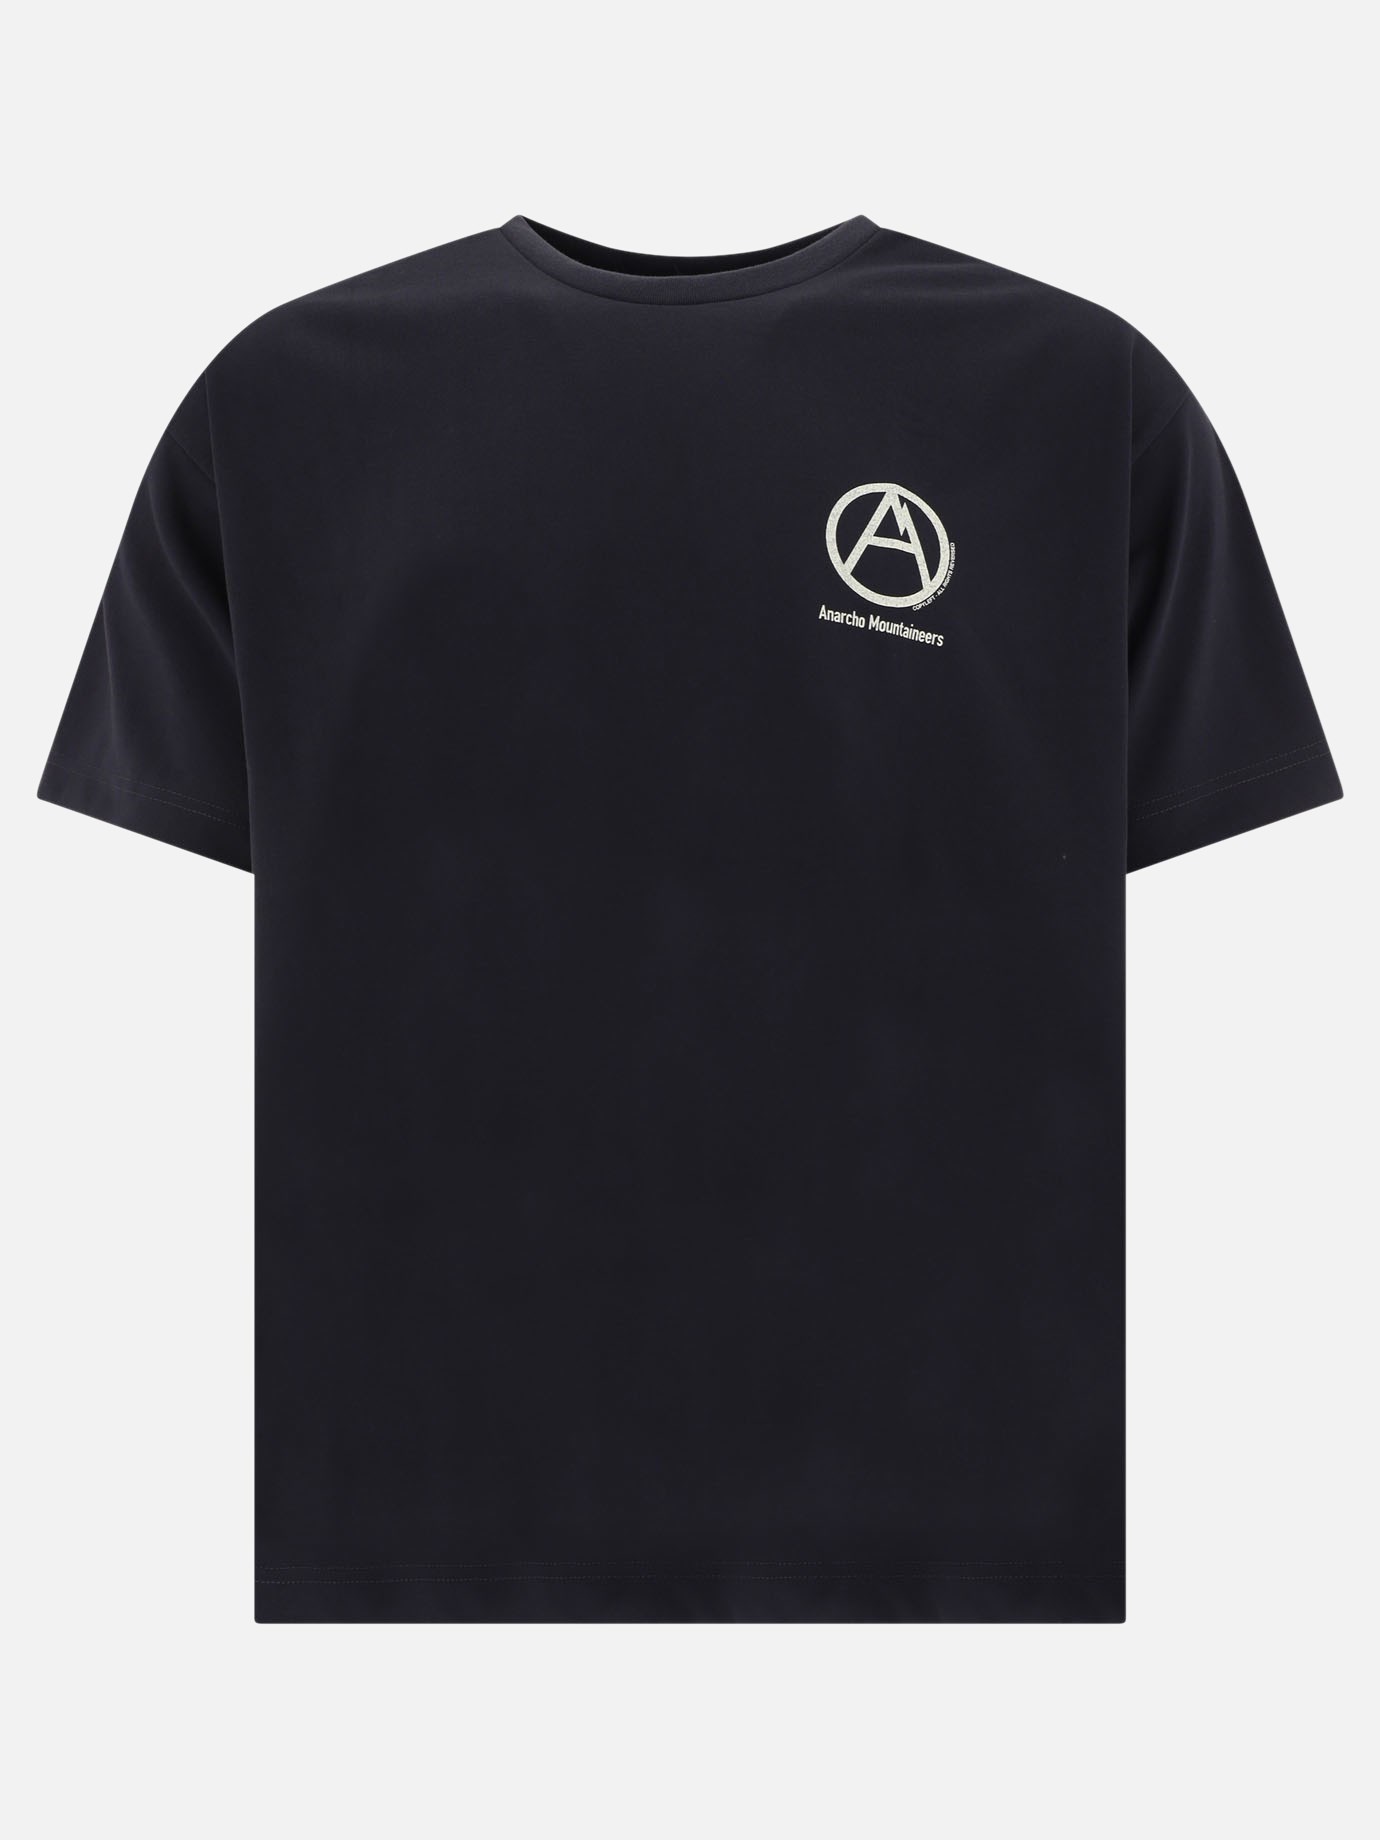  A  t-shirtby Mountain Research - 3